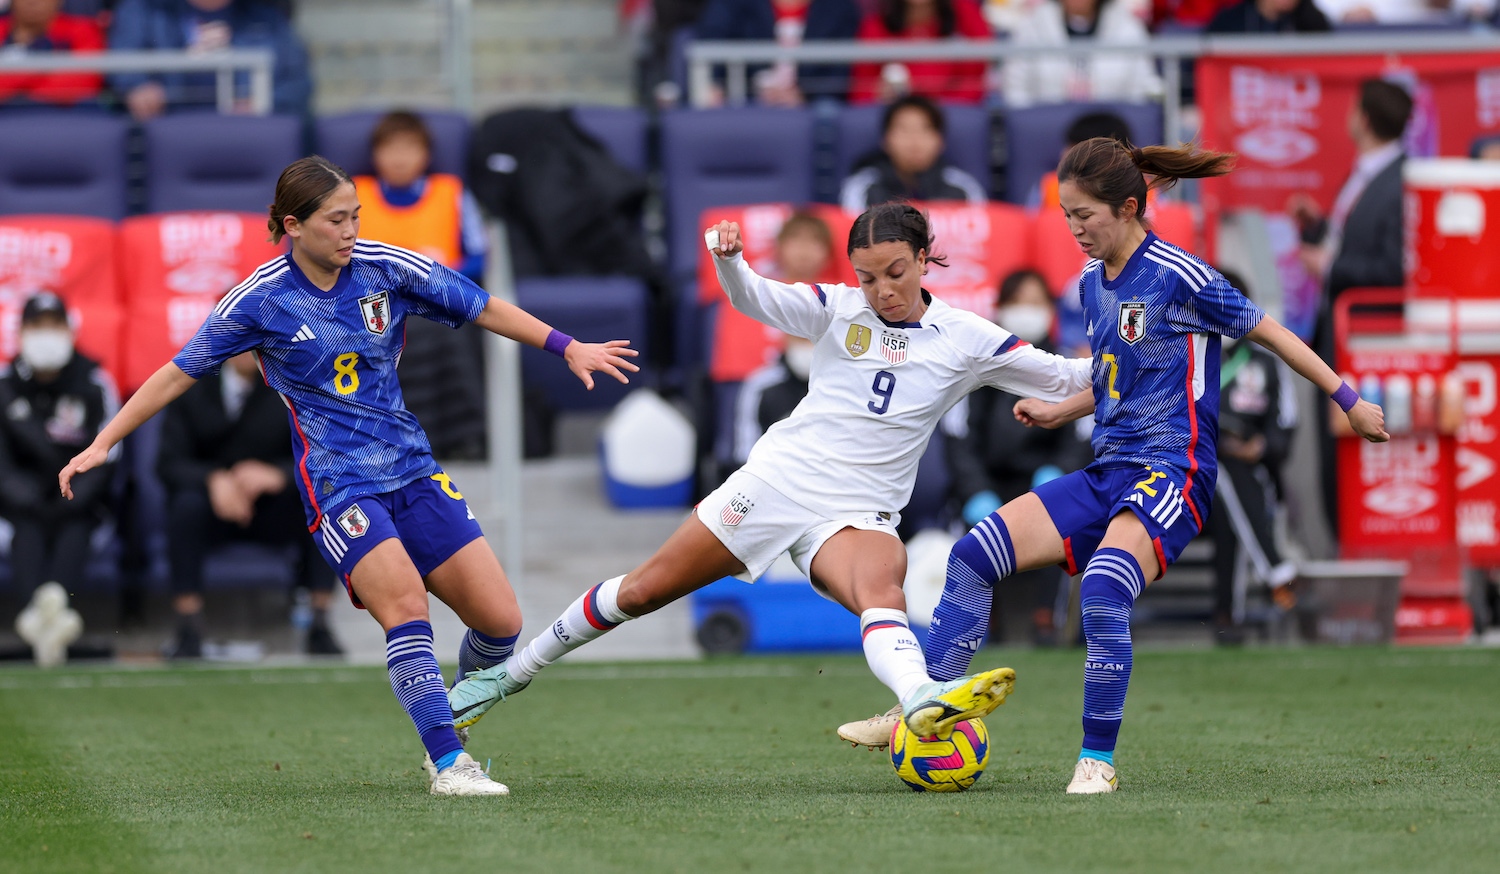 NASHVILLE, TN - FEBRUARY 19: Mallory Swanson #9 of the United States is marked by Fuka Nagano #8 and Risa Shimizu #2 of Japan during a game between Japan and USWNT at GEODIS Park on February 19, 2023 in Nashville, Tennessee. (Photo by John Dorton/ISI Photos/Getty Images)